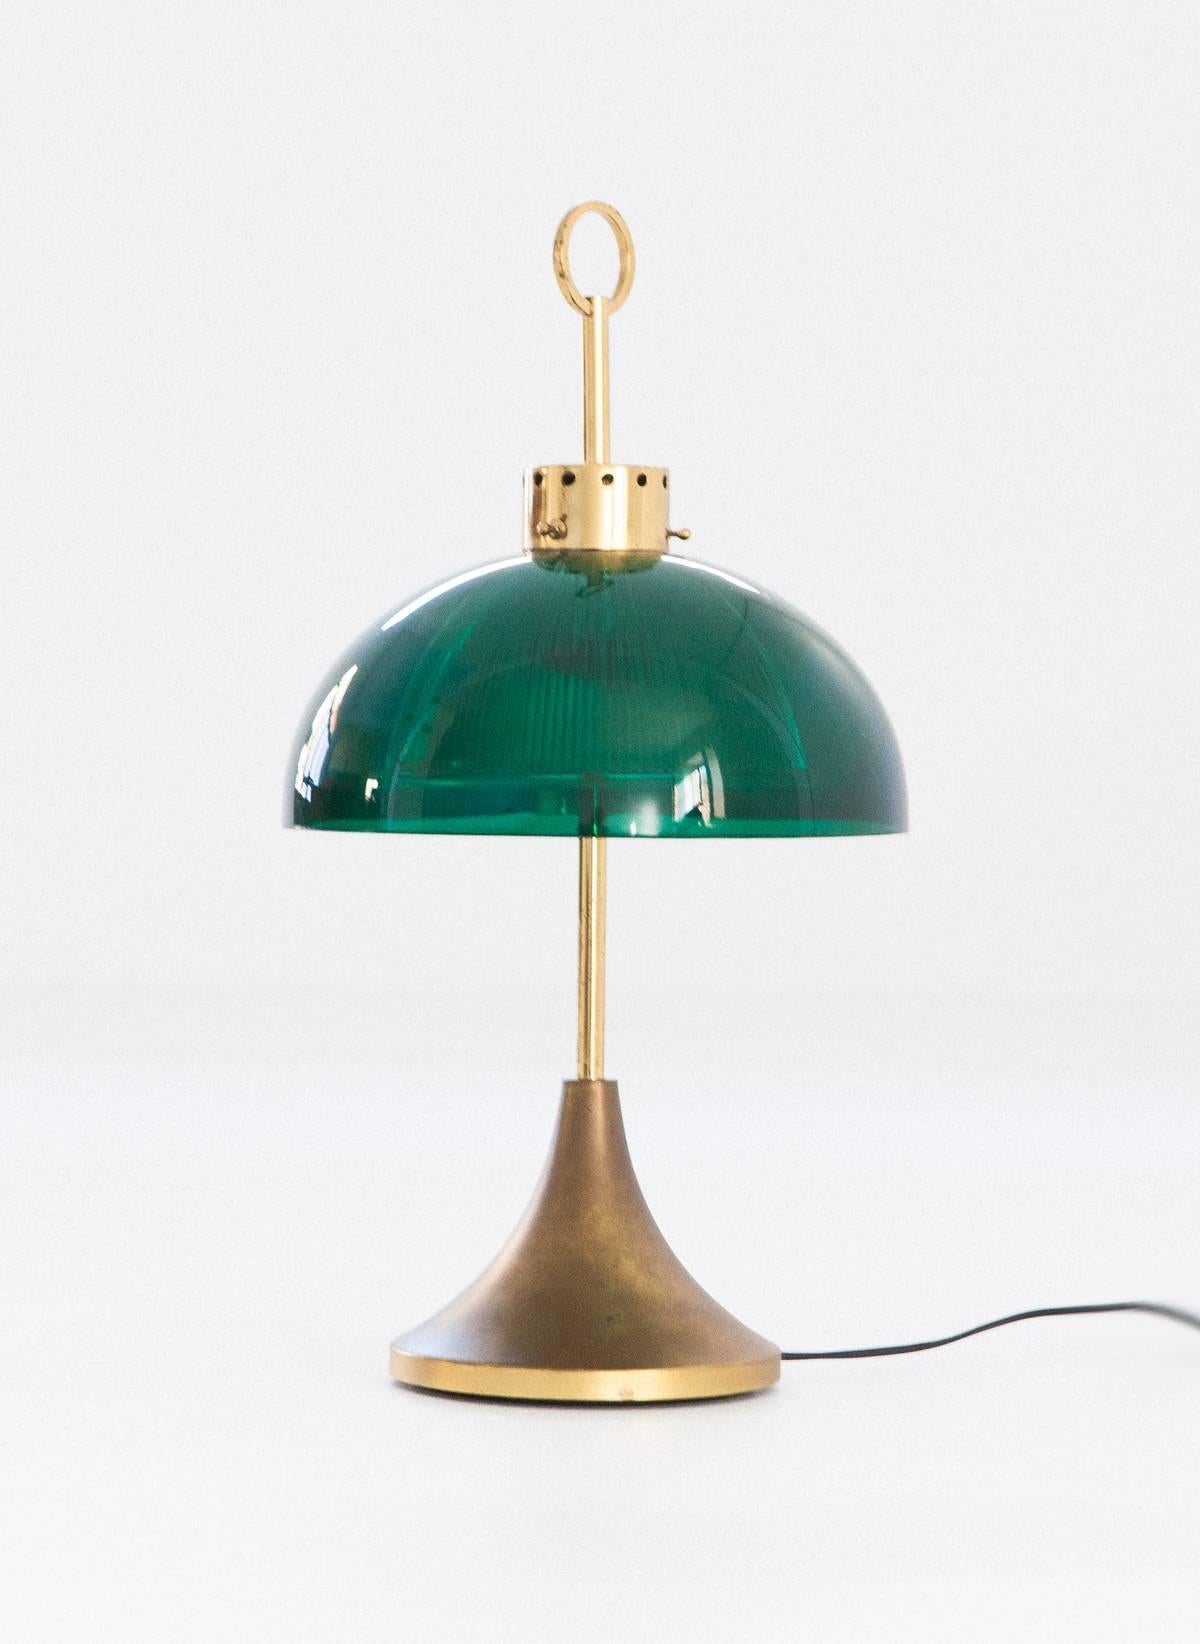 An elegant Italian lamp from the 1950s.
Made of brass with a charming original patina , then a Perspex external shade and glass internal shade.

 